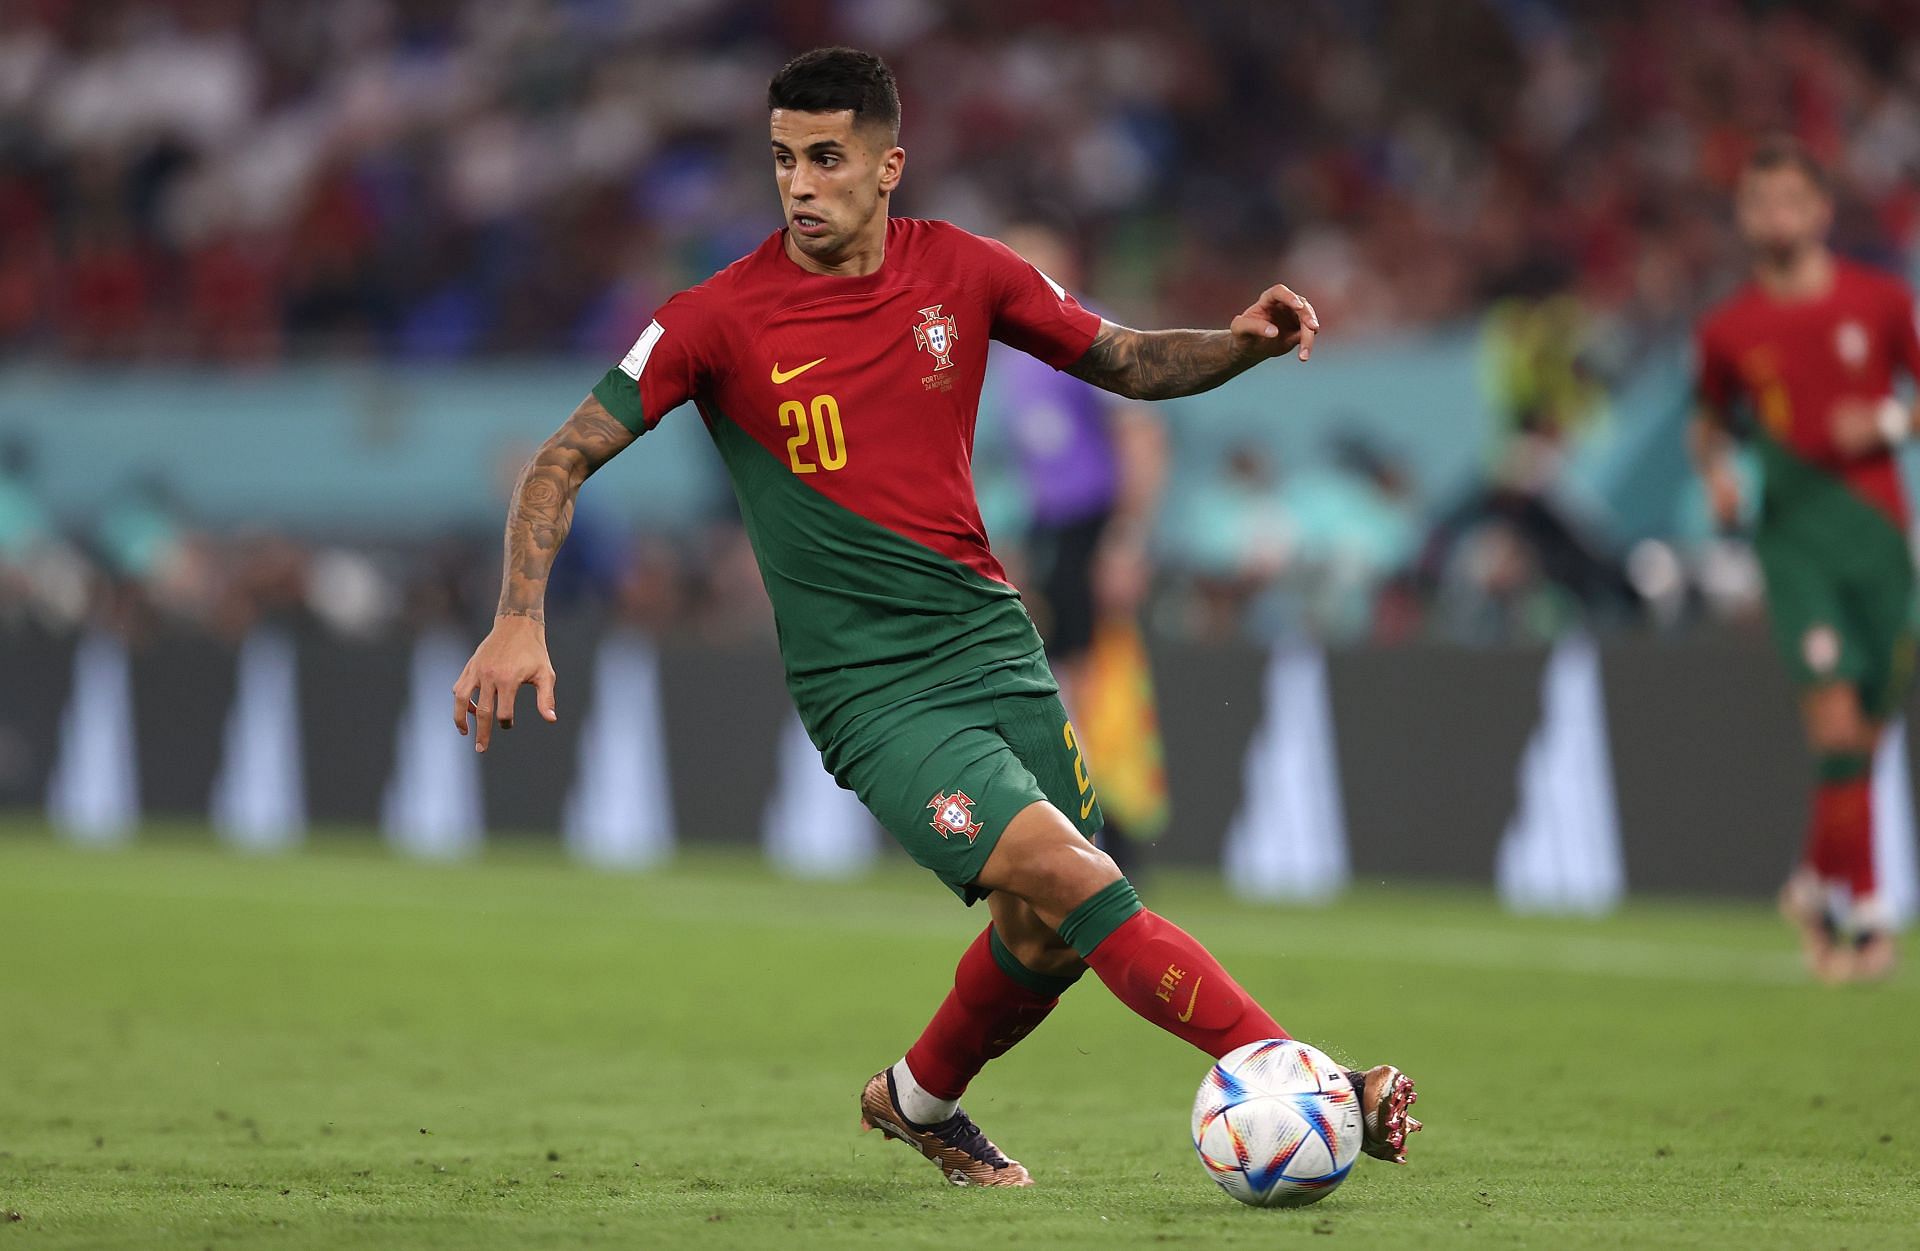 Joao Cancelo was offered to Real Madrid.